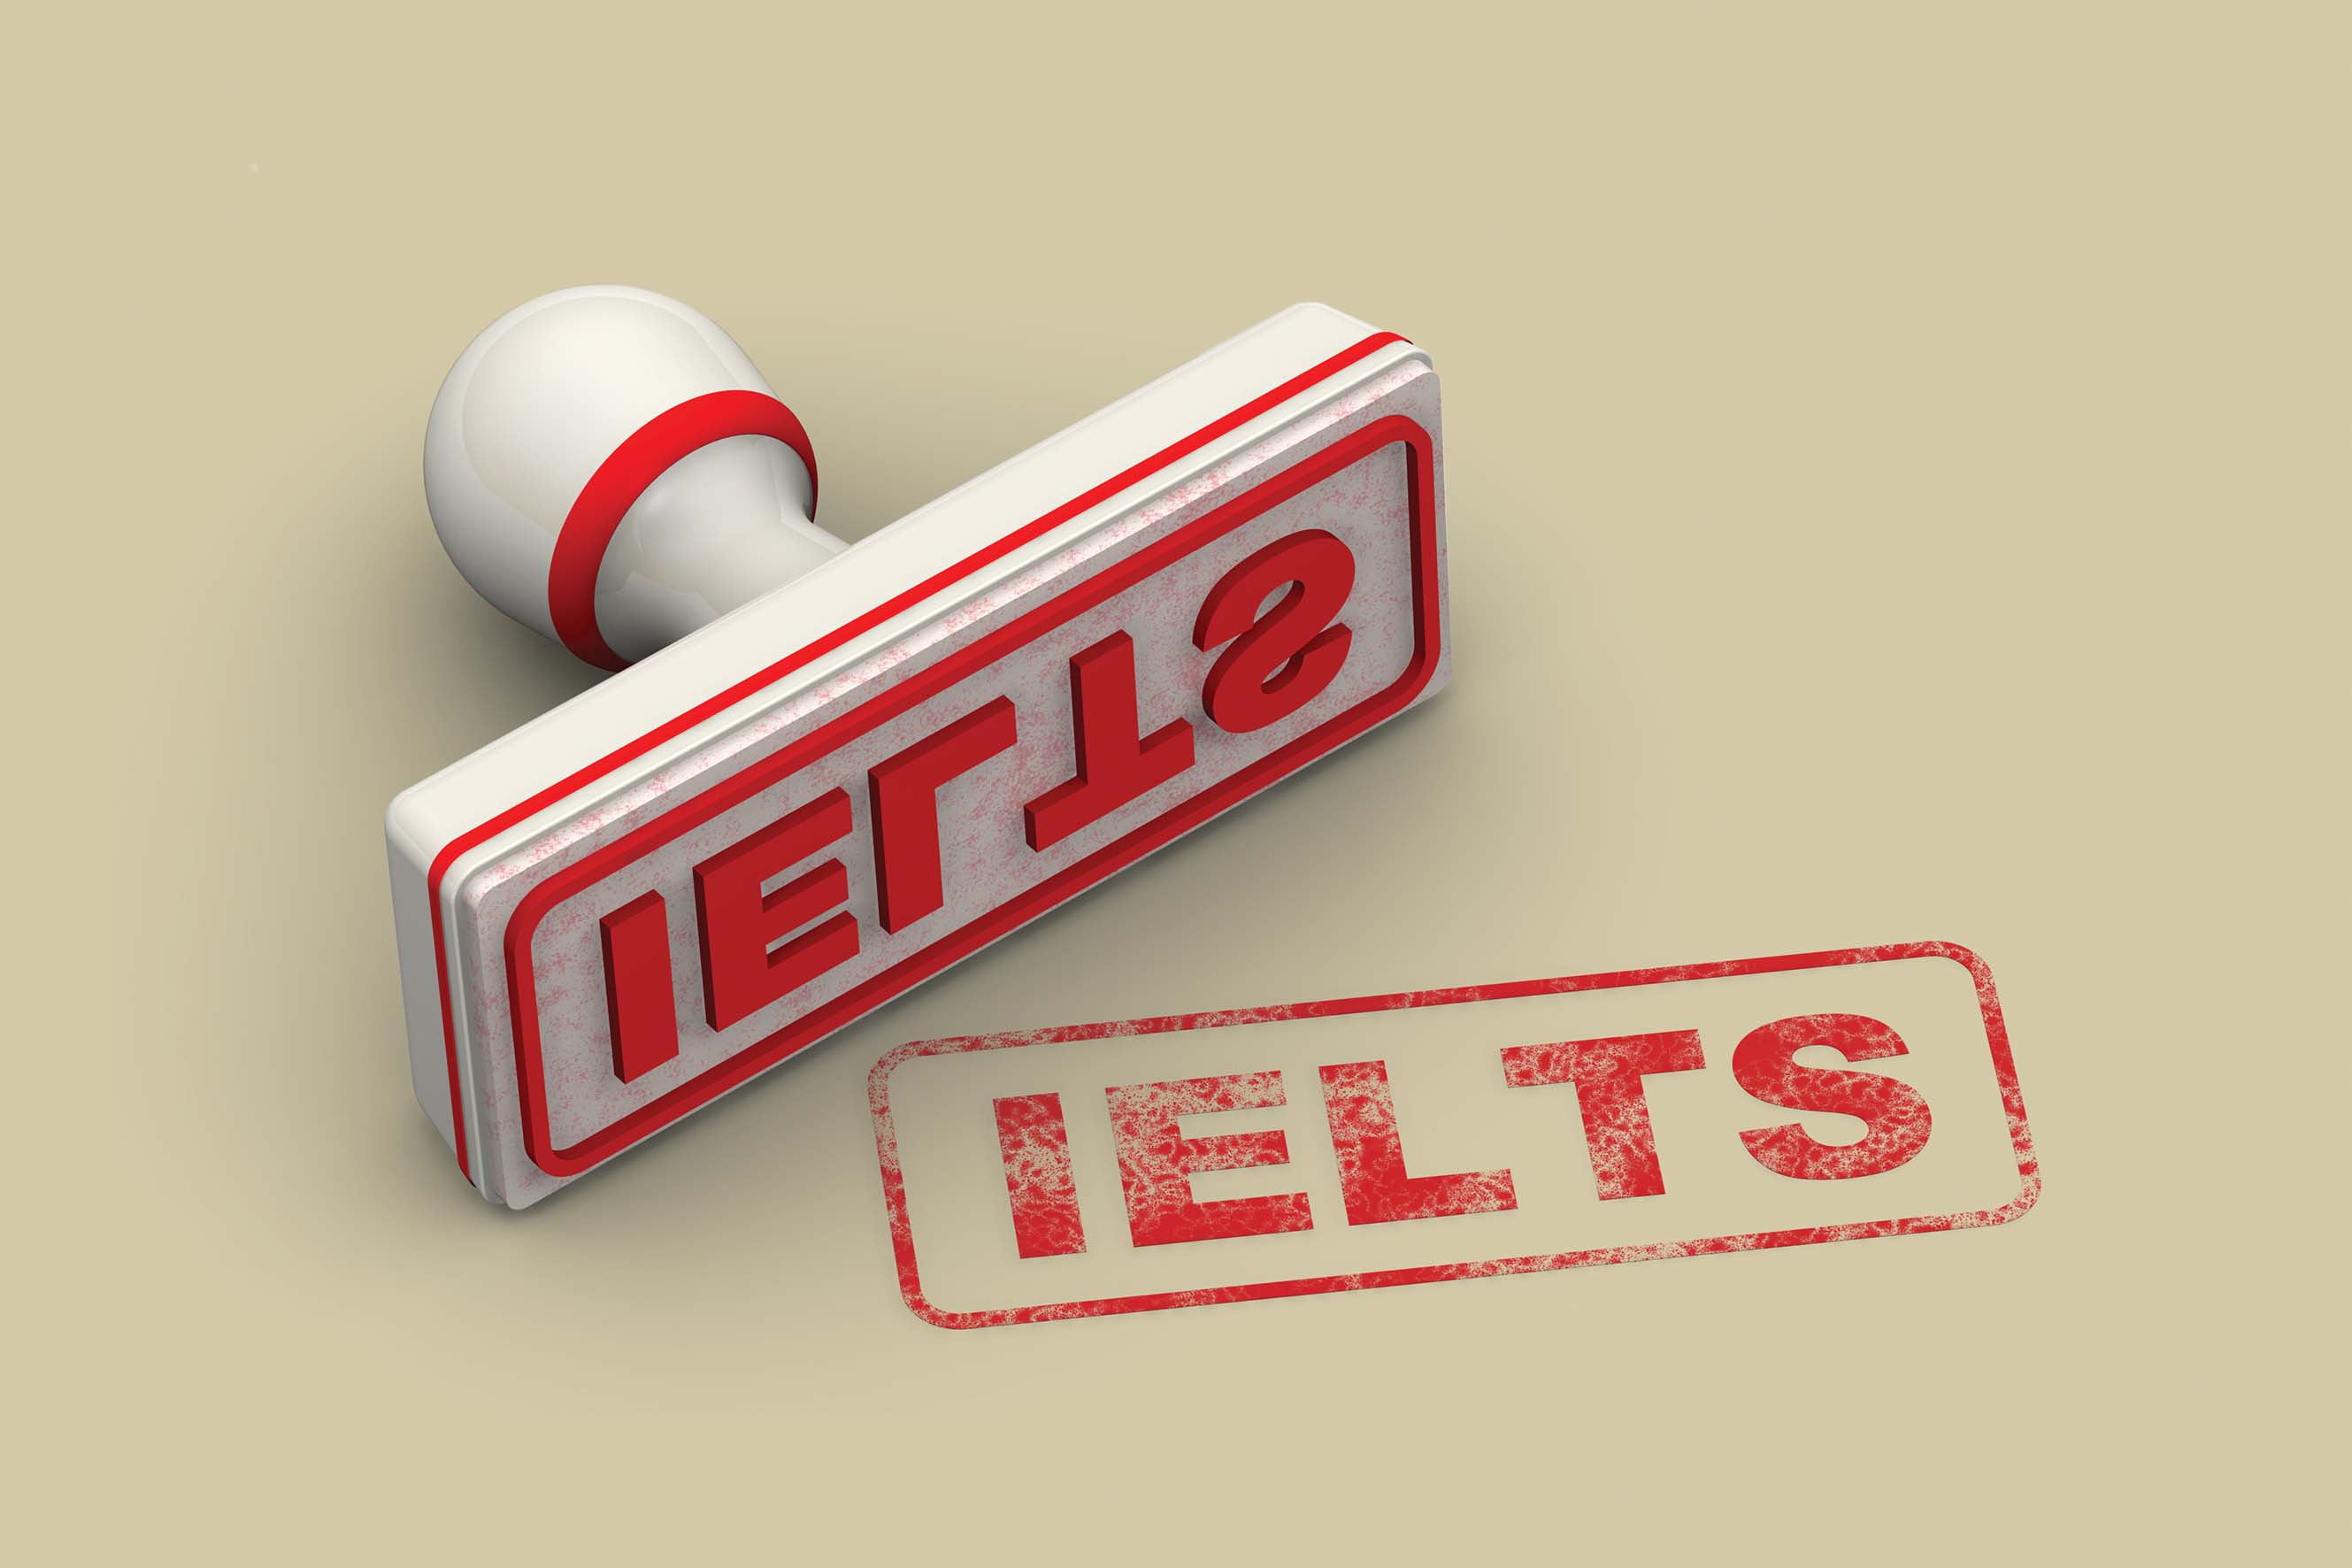 Tips for scoring high on the IELTS reading section